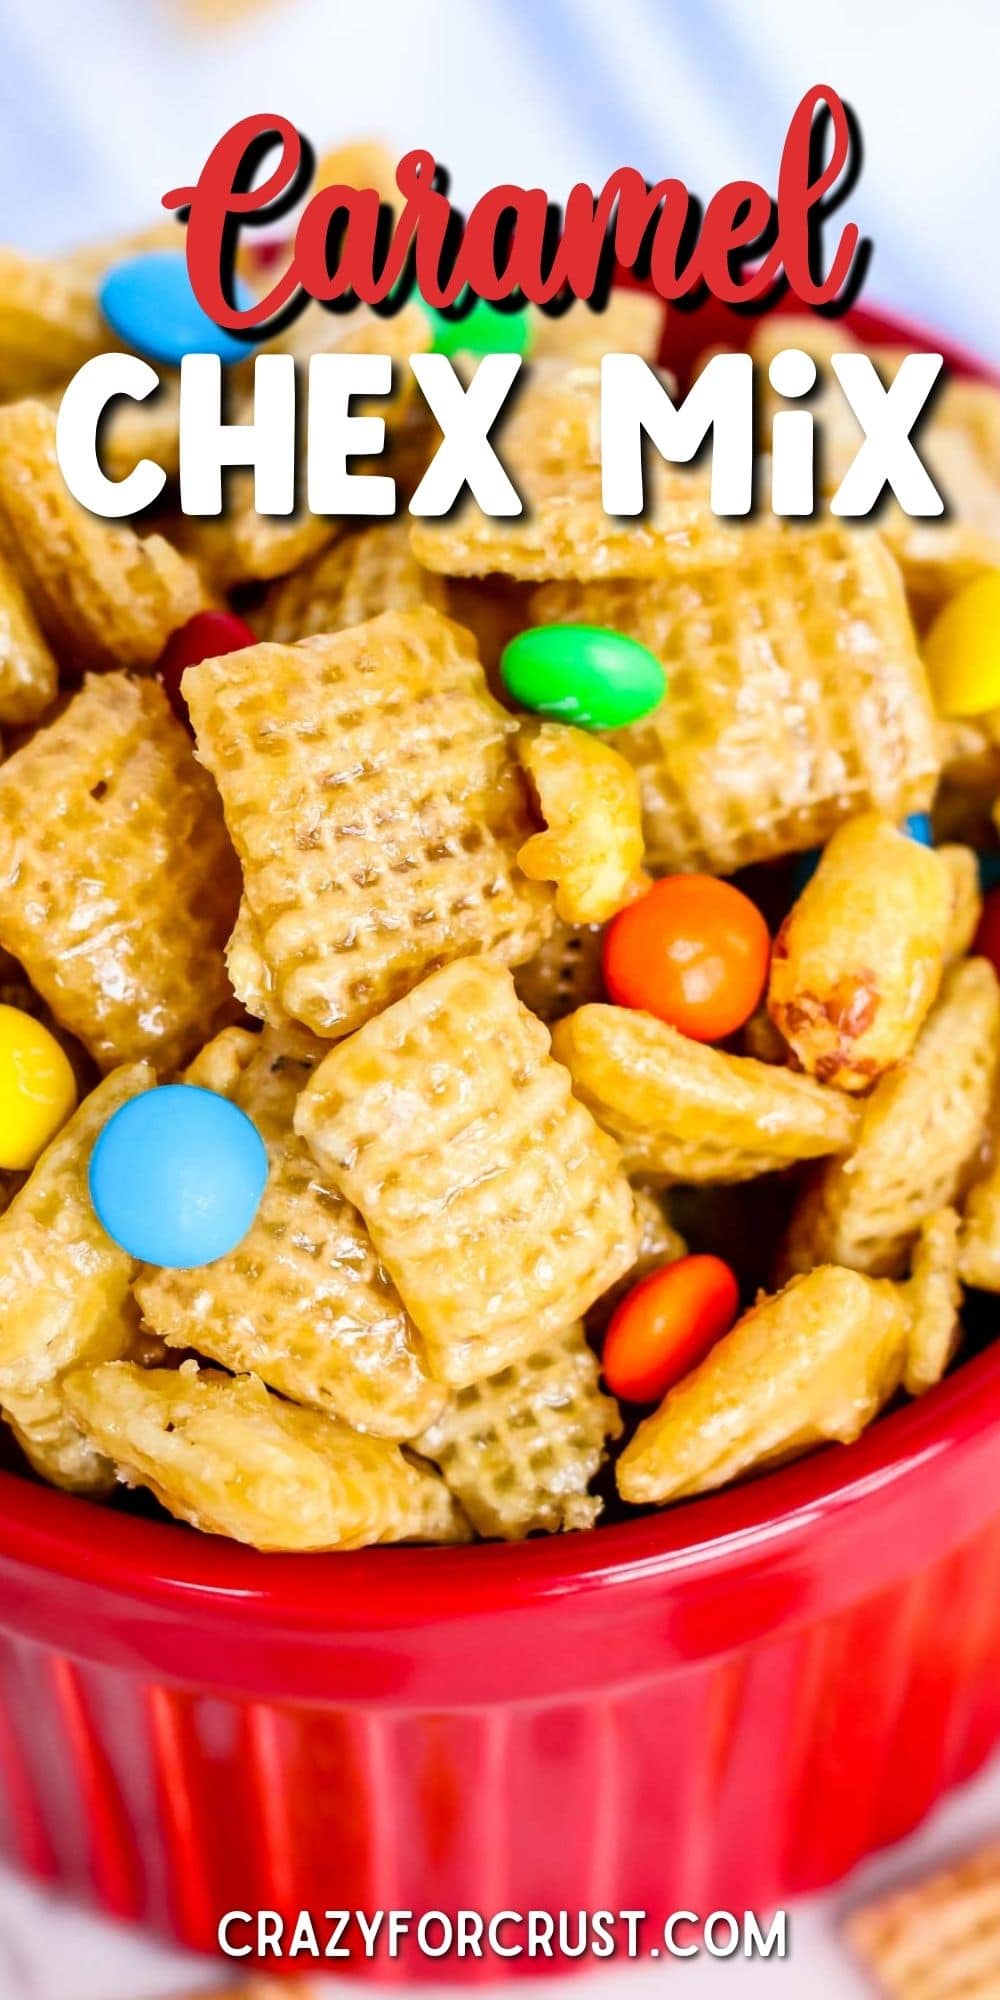 Small red bowl filled with caramel chex mix with recipe title on top of image